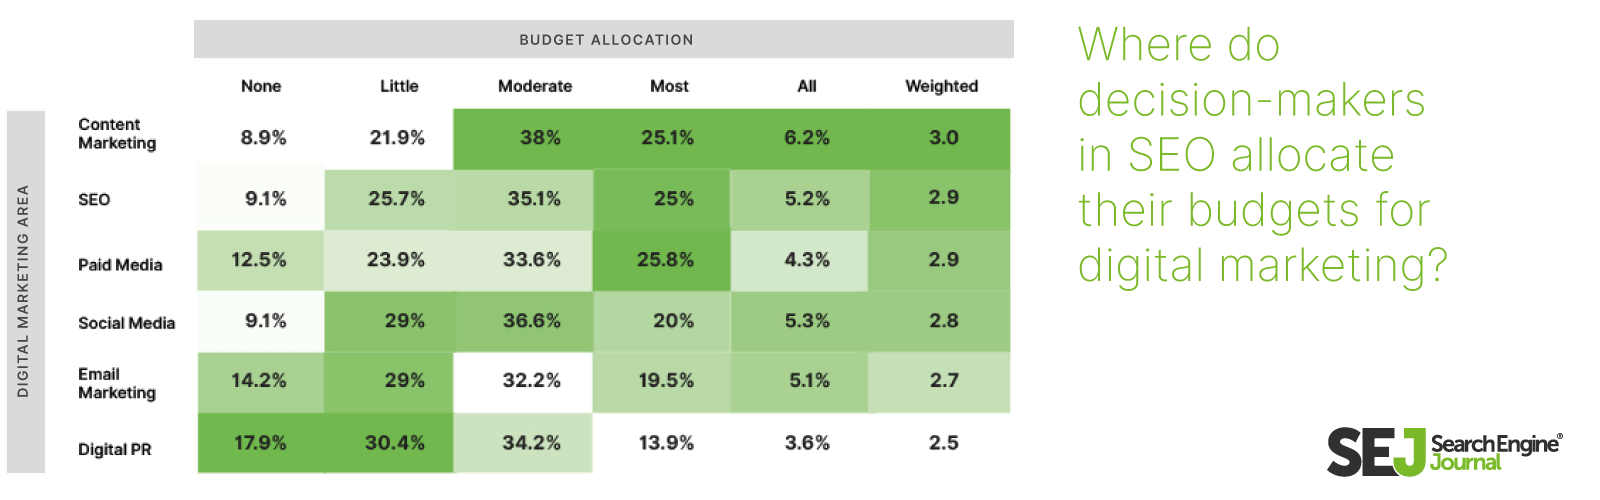 Where do decision-makers in SEO allocate their budgets for digital marketing?